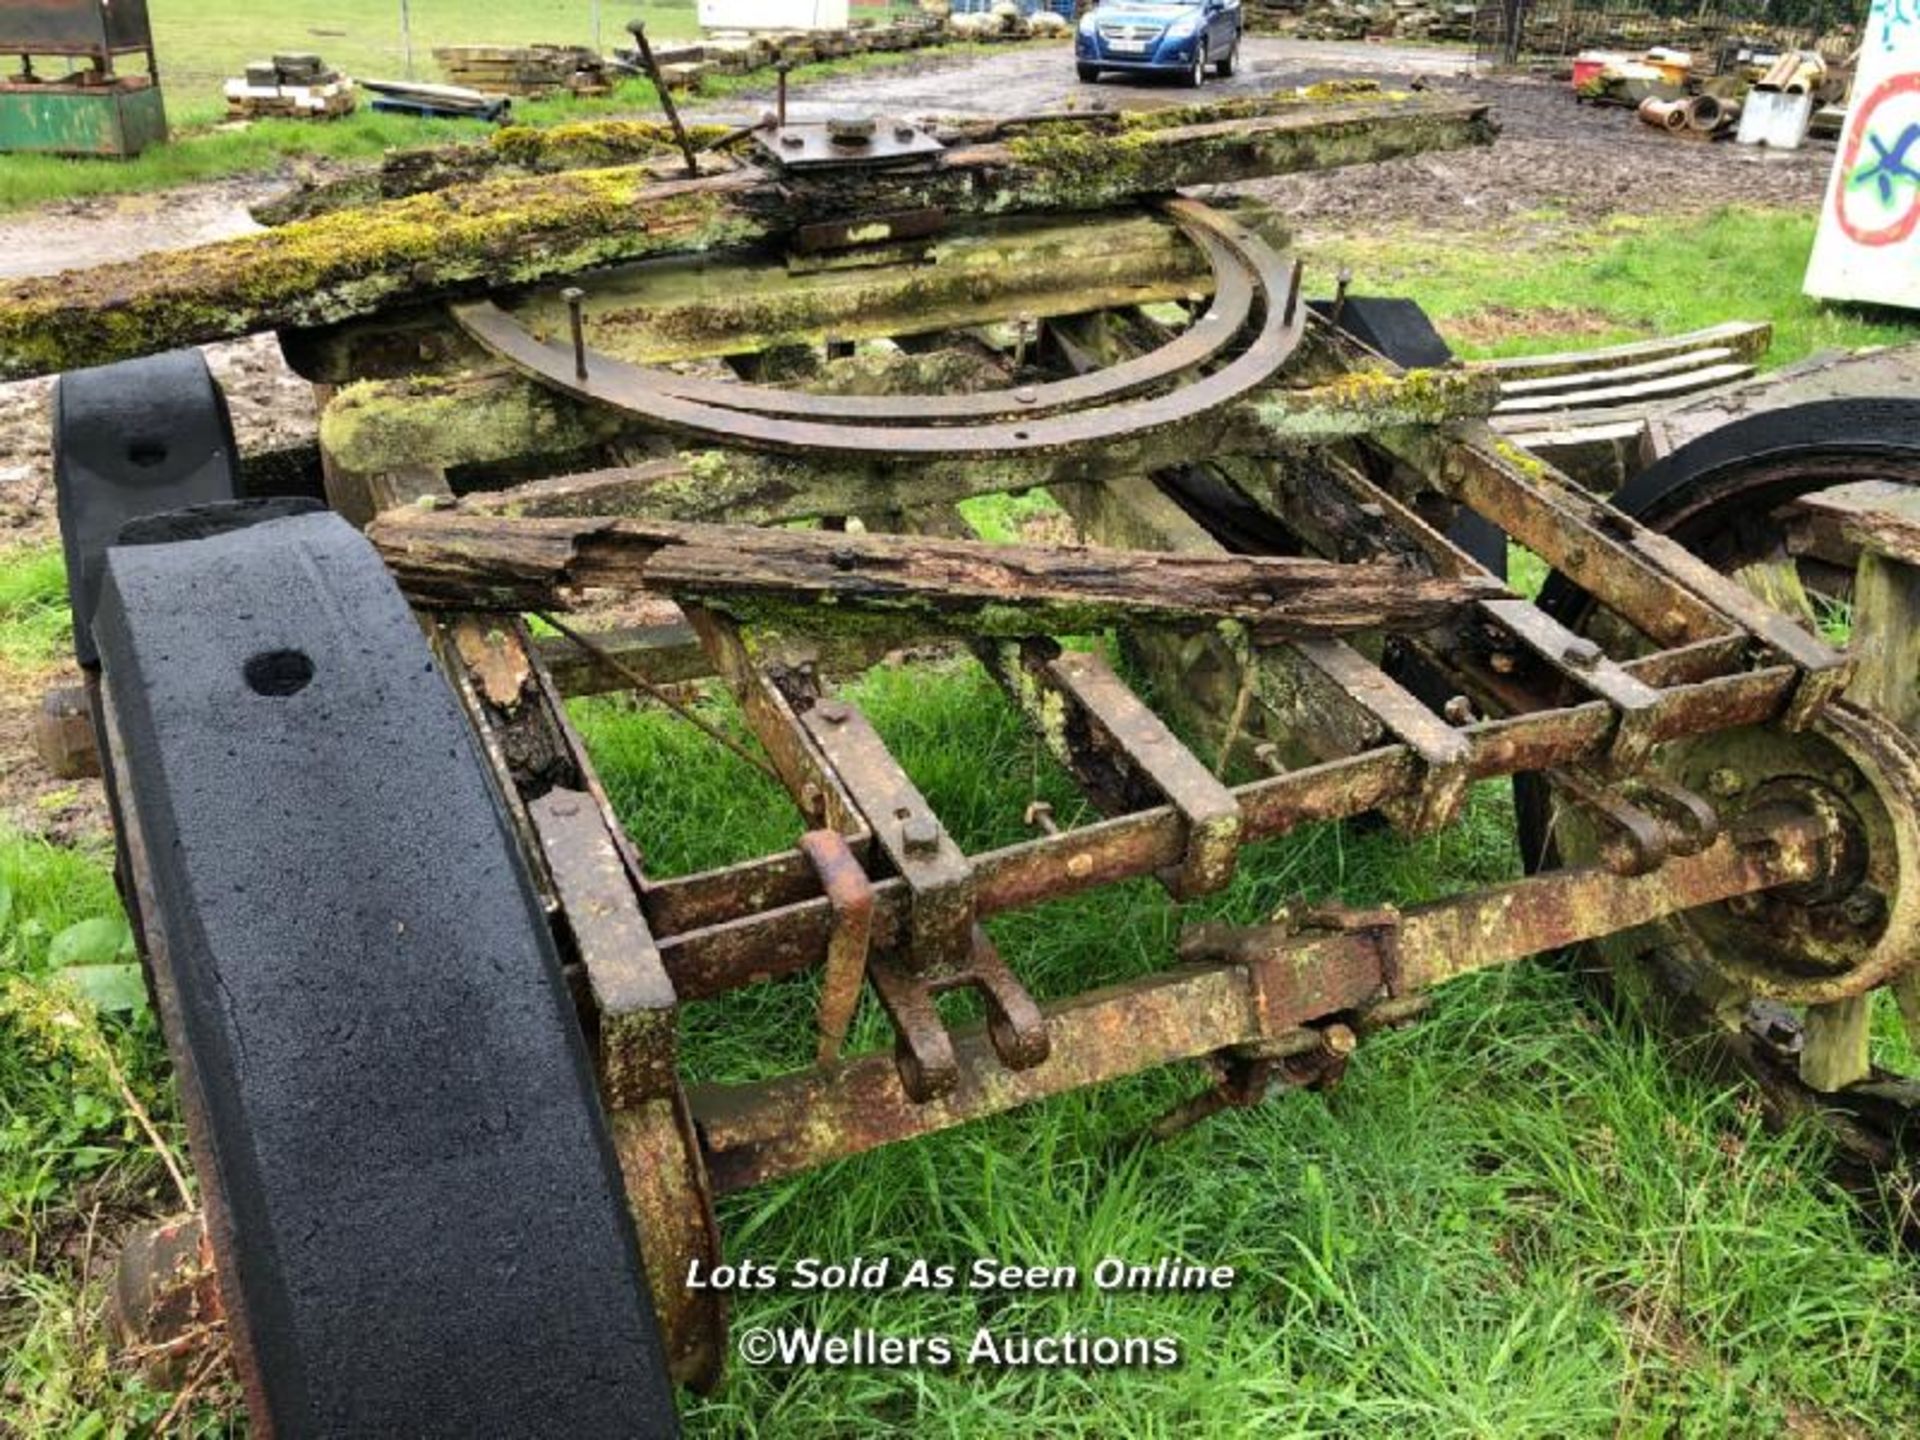 OLD RAILWAY CART, IN NEED OF RESTORATION, TOTAL DIMENSIONS APPROX. 220CM W X 230CM L X 130CM H - Image 5 of 7